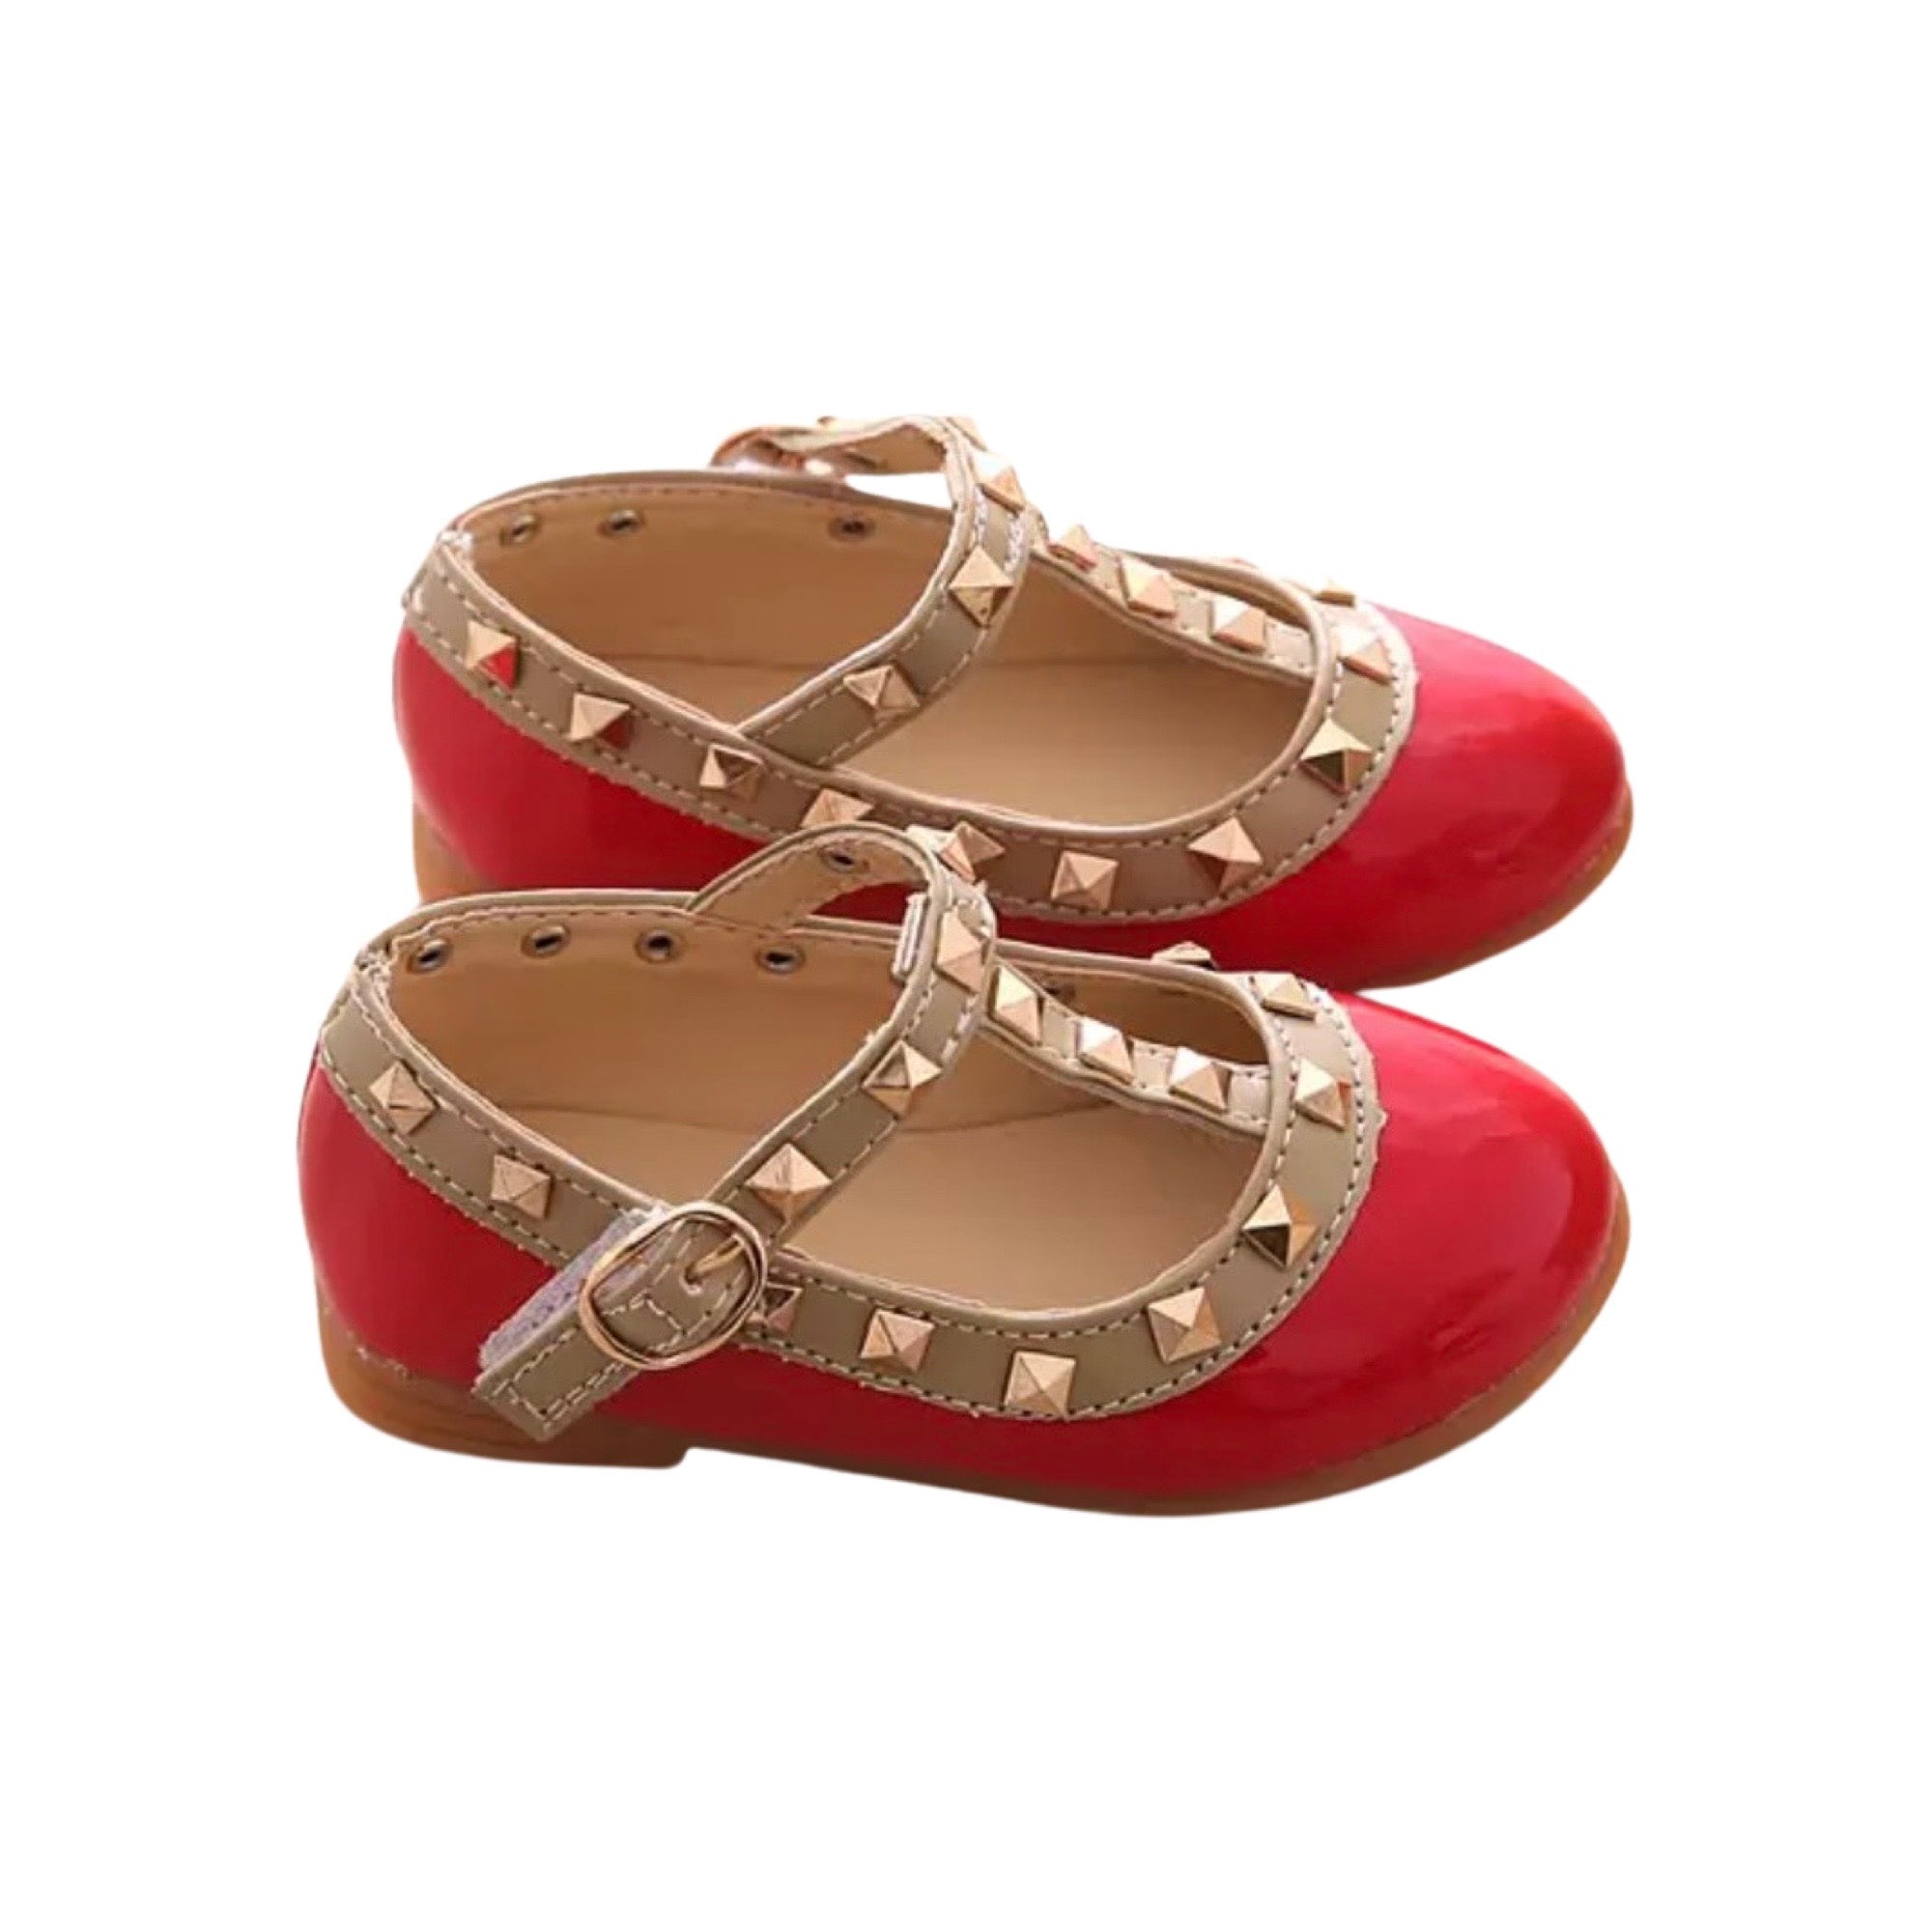 Valerie -Rockstar Stud Patent Leather Girl Shoes - Red.